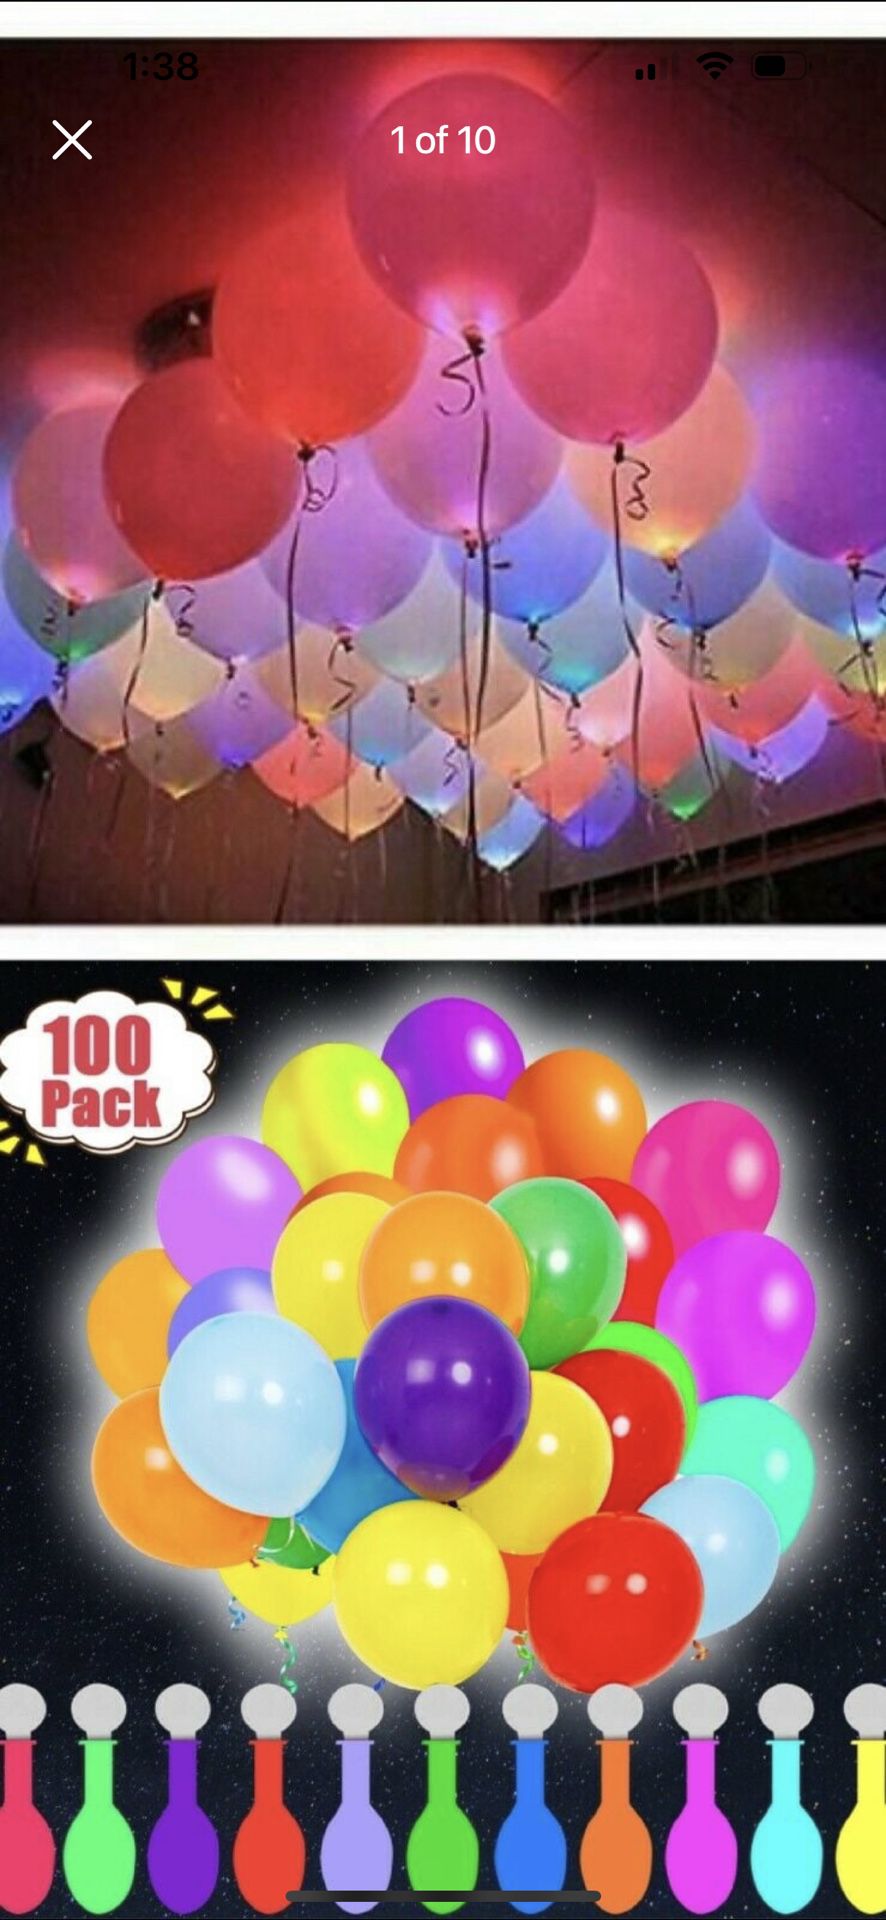 LED Balloons 100 Packs Light Up PERFECT PARTY Decoration Wedding Kids Birthday (Mix Color)chi